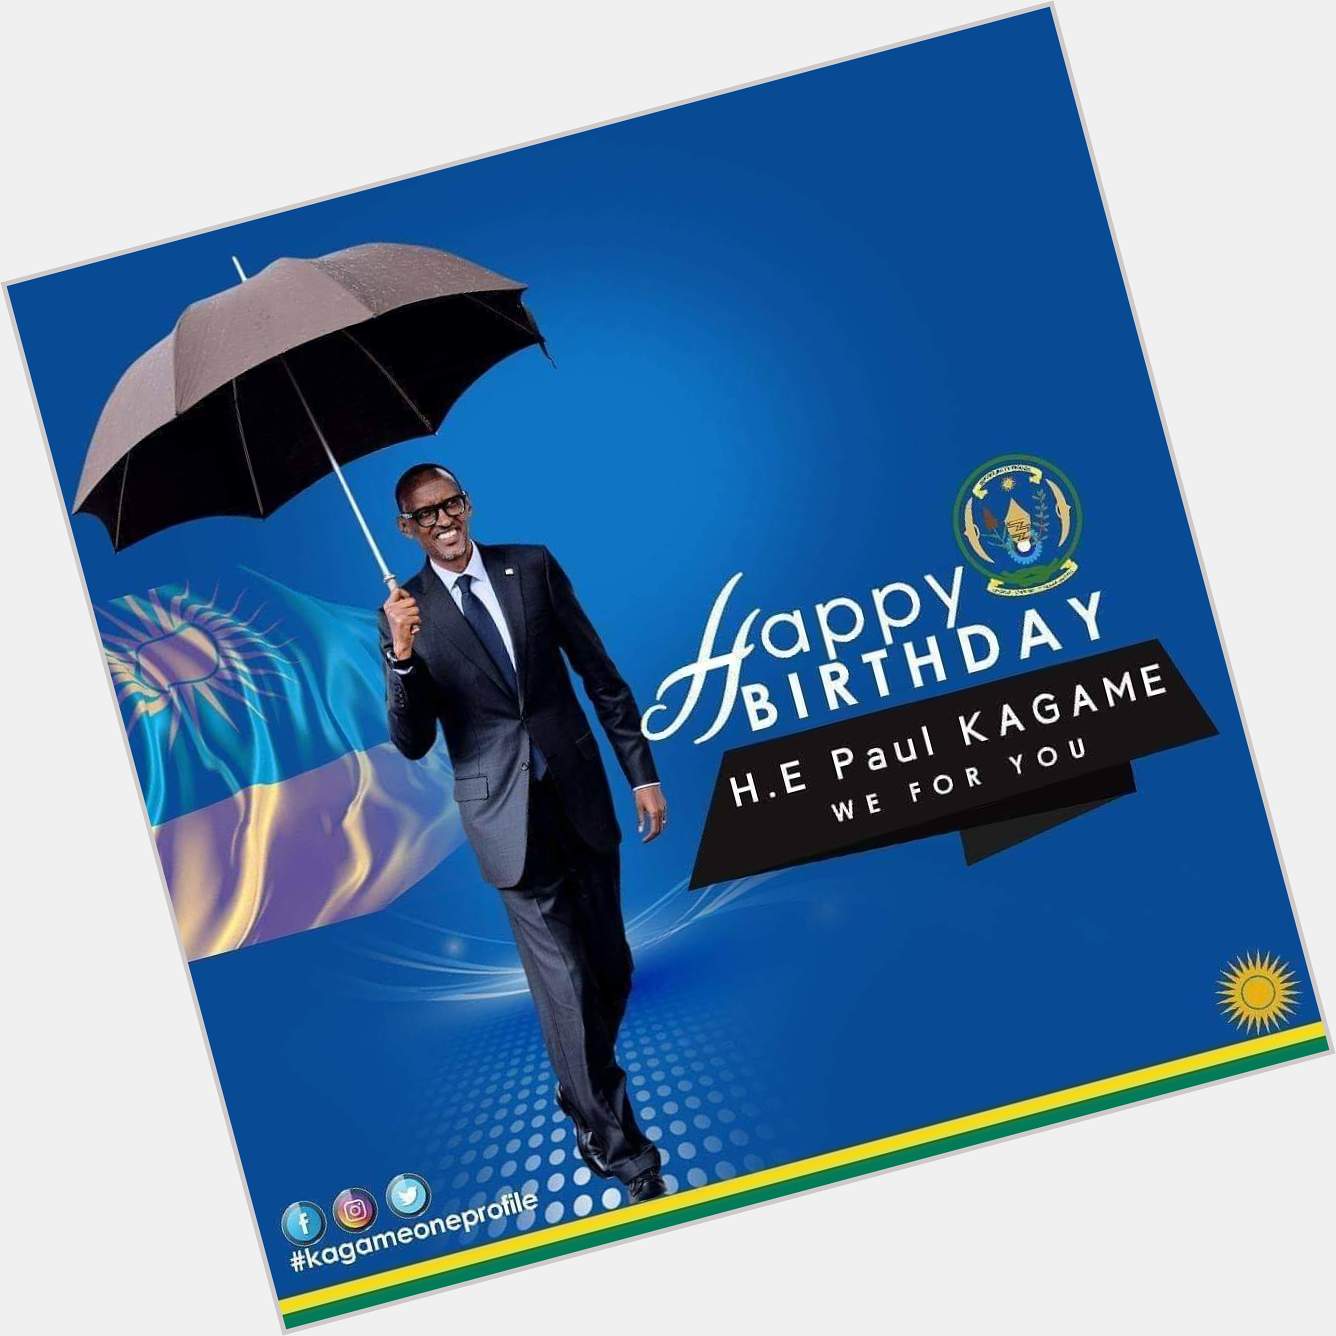 Happy birthday to you Mr. Paul Kagame 